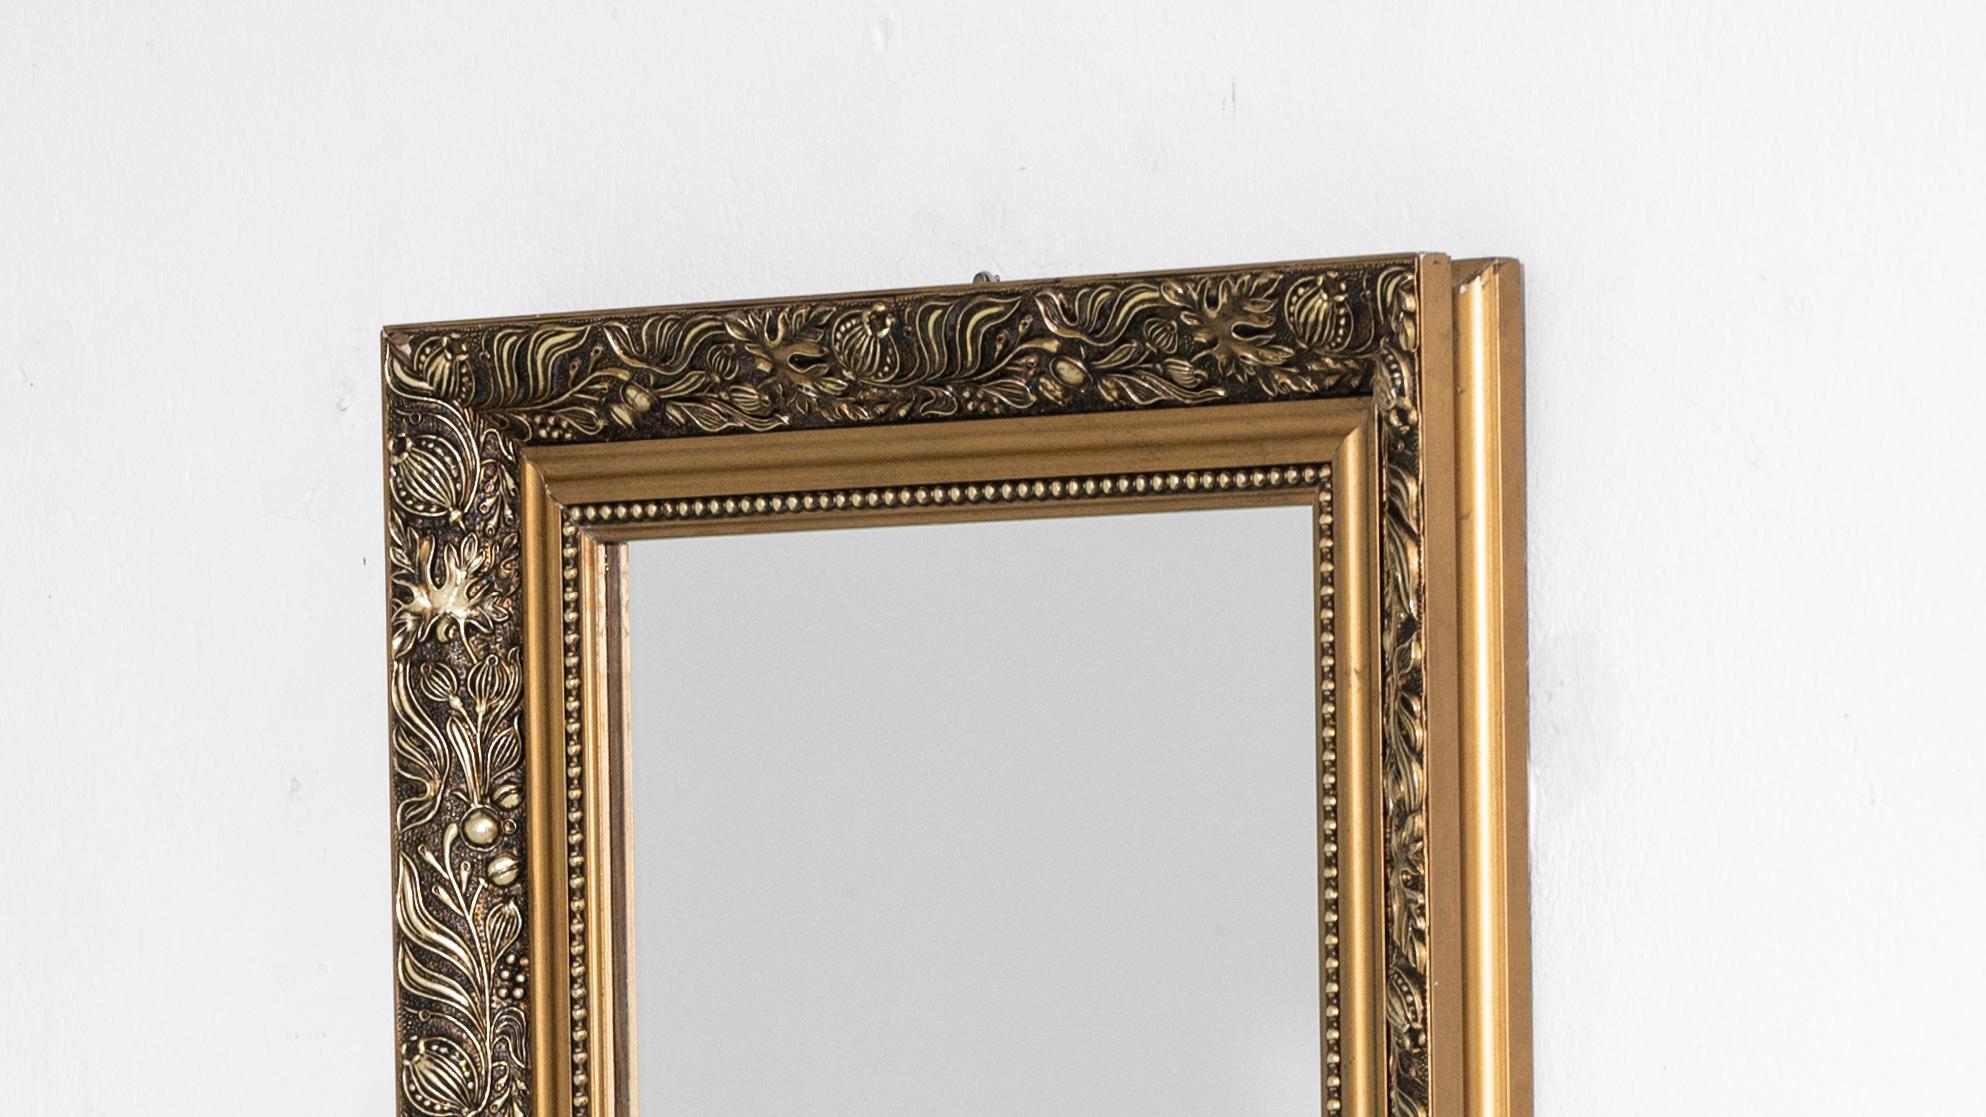 Indulge in the opulent charm of this 20th Century French Gilded Wooden Mirror. The intricate ornate details adorning the border showcase a wealth of golden foliage designs, elevating the mirror to a level of timeless elegance. The gilded surface